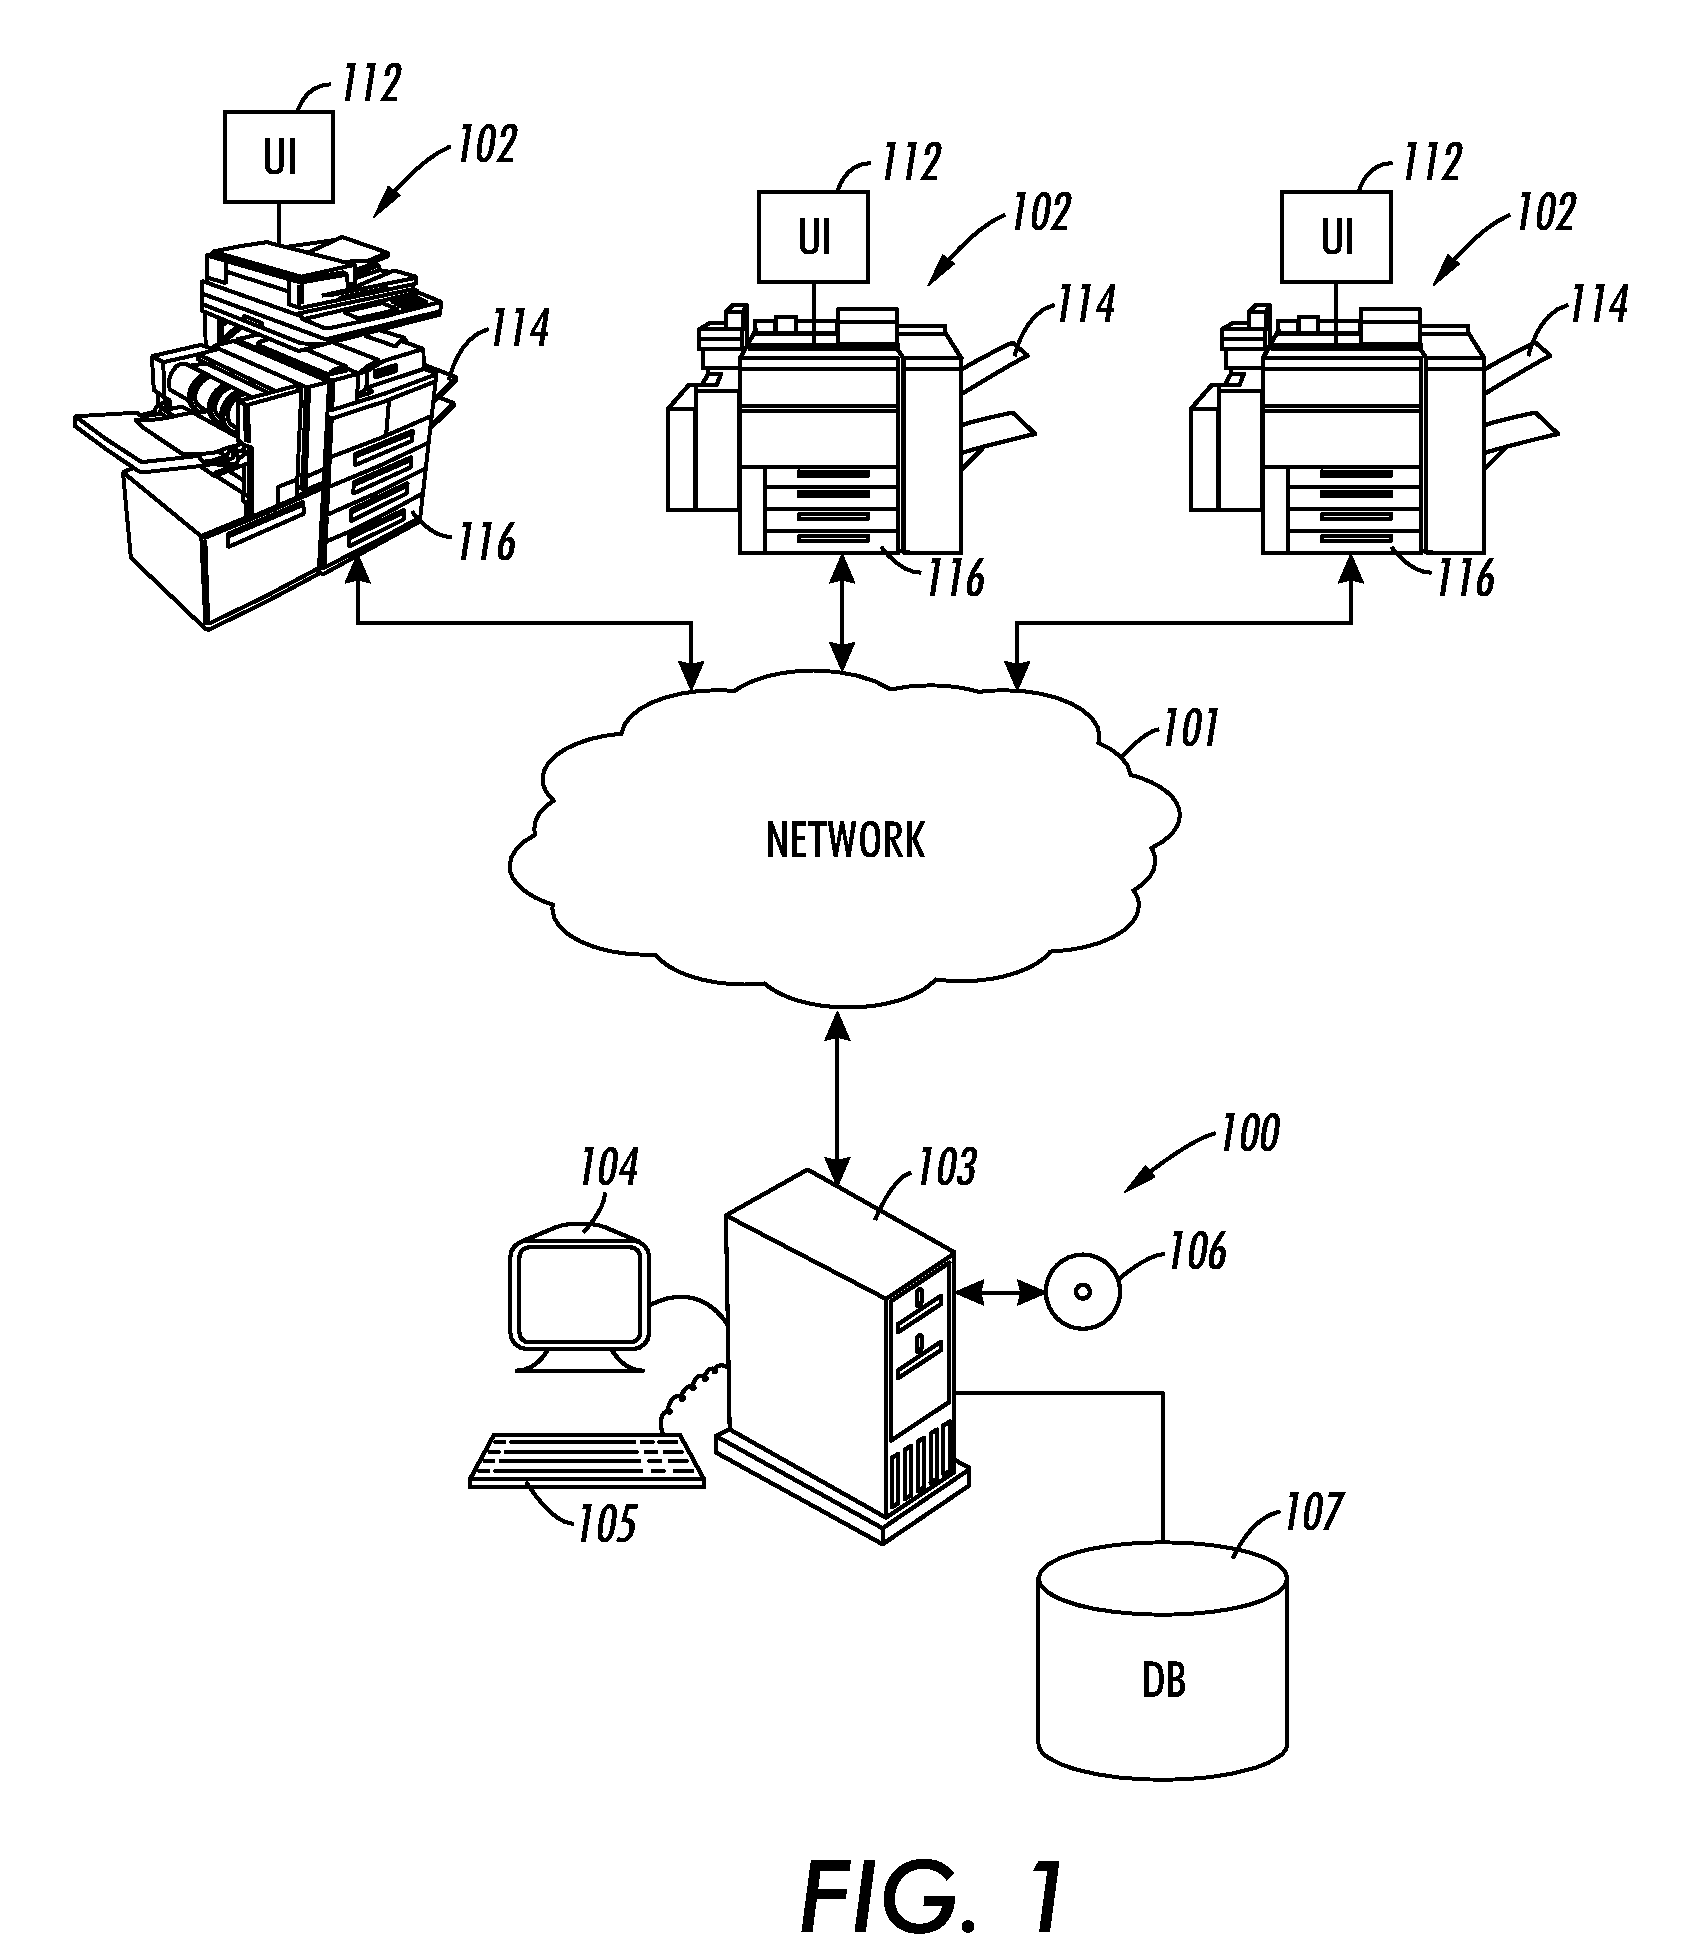 Sharing EIP service applications across a fleet of multi-function document reproduction devices in a peer-aware network